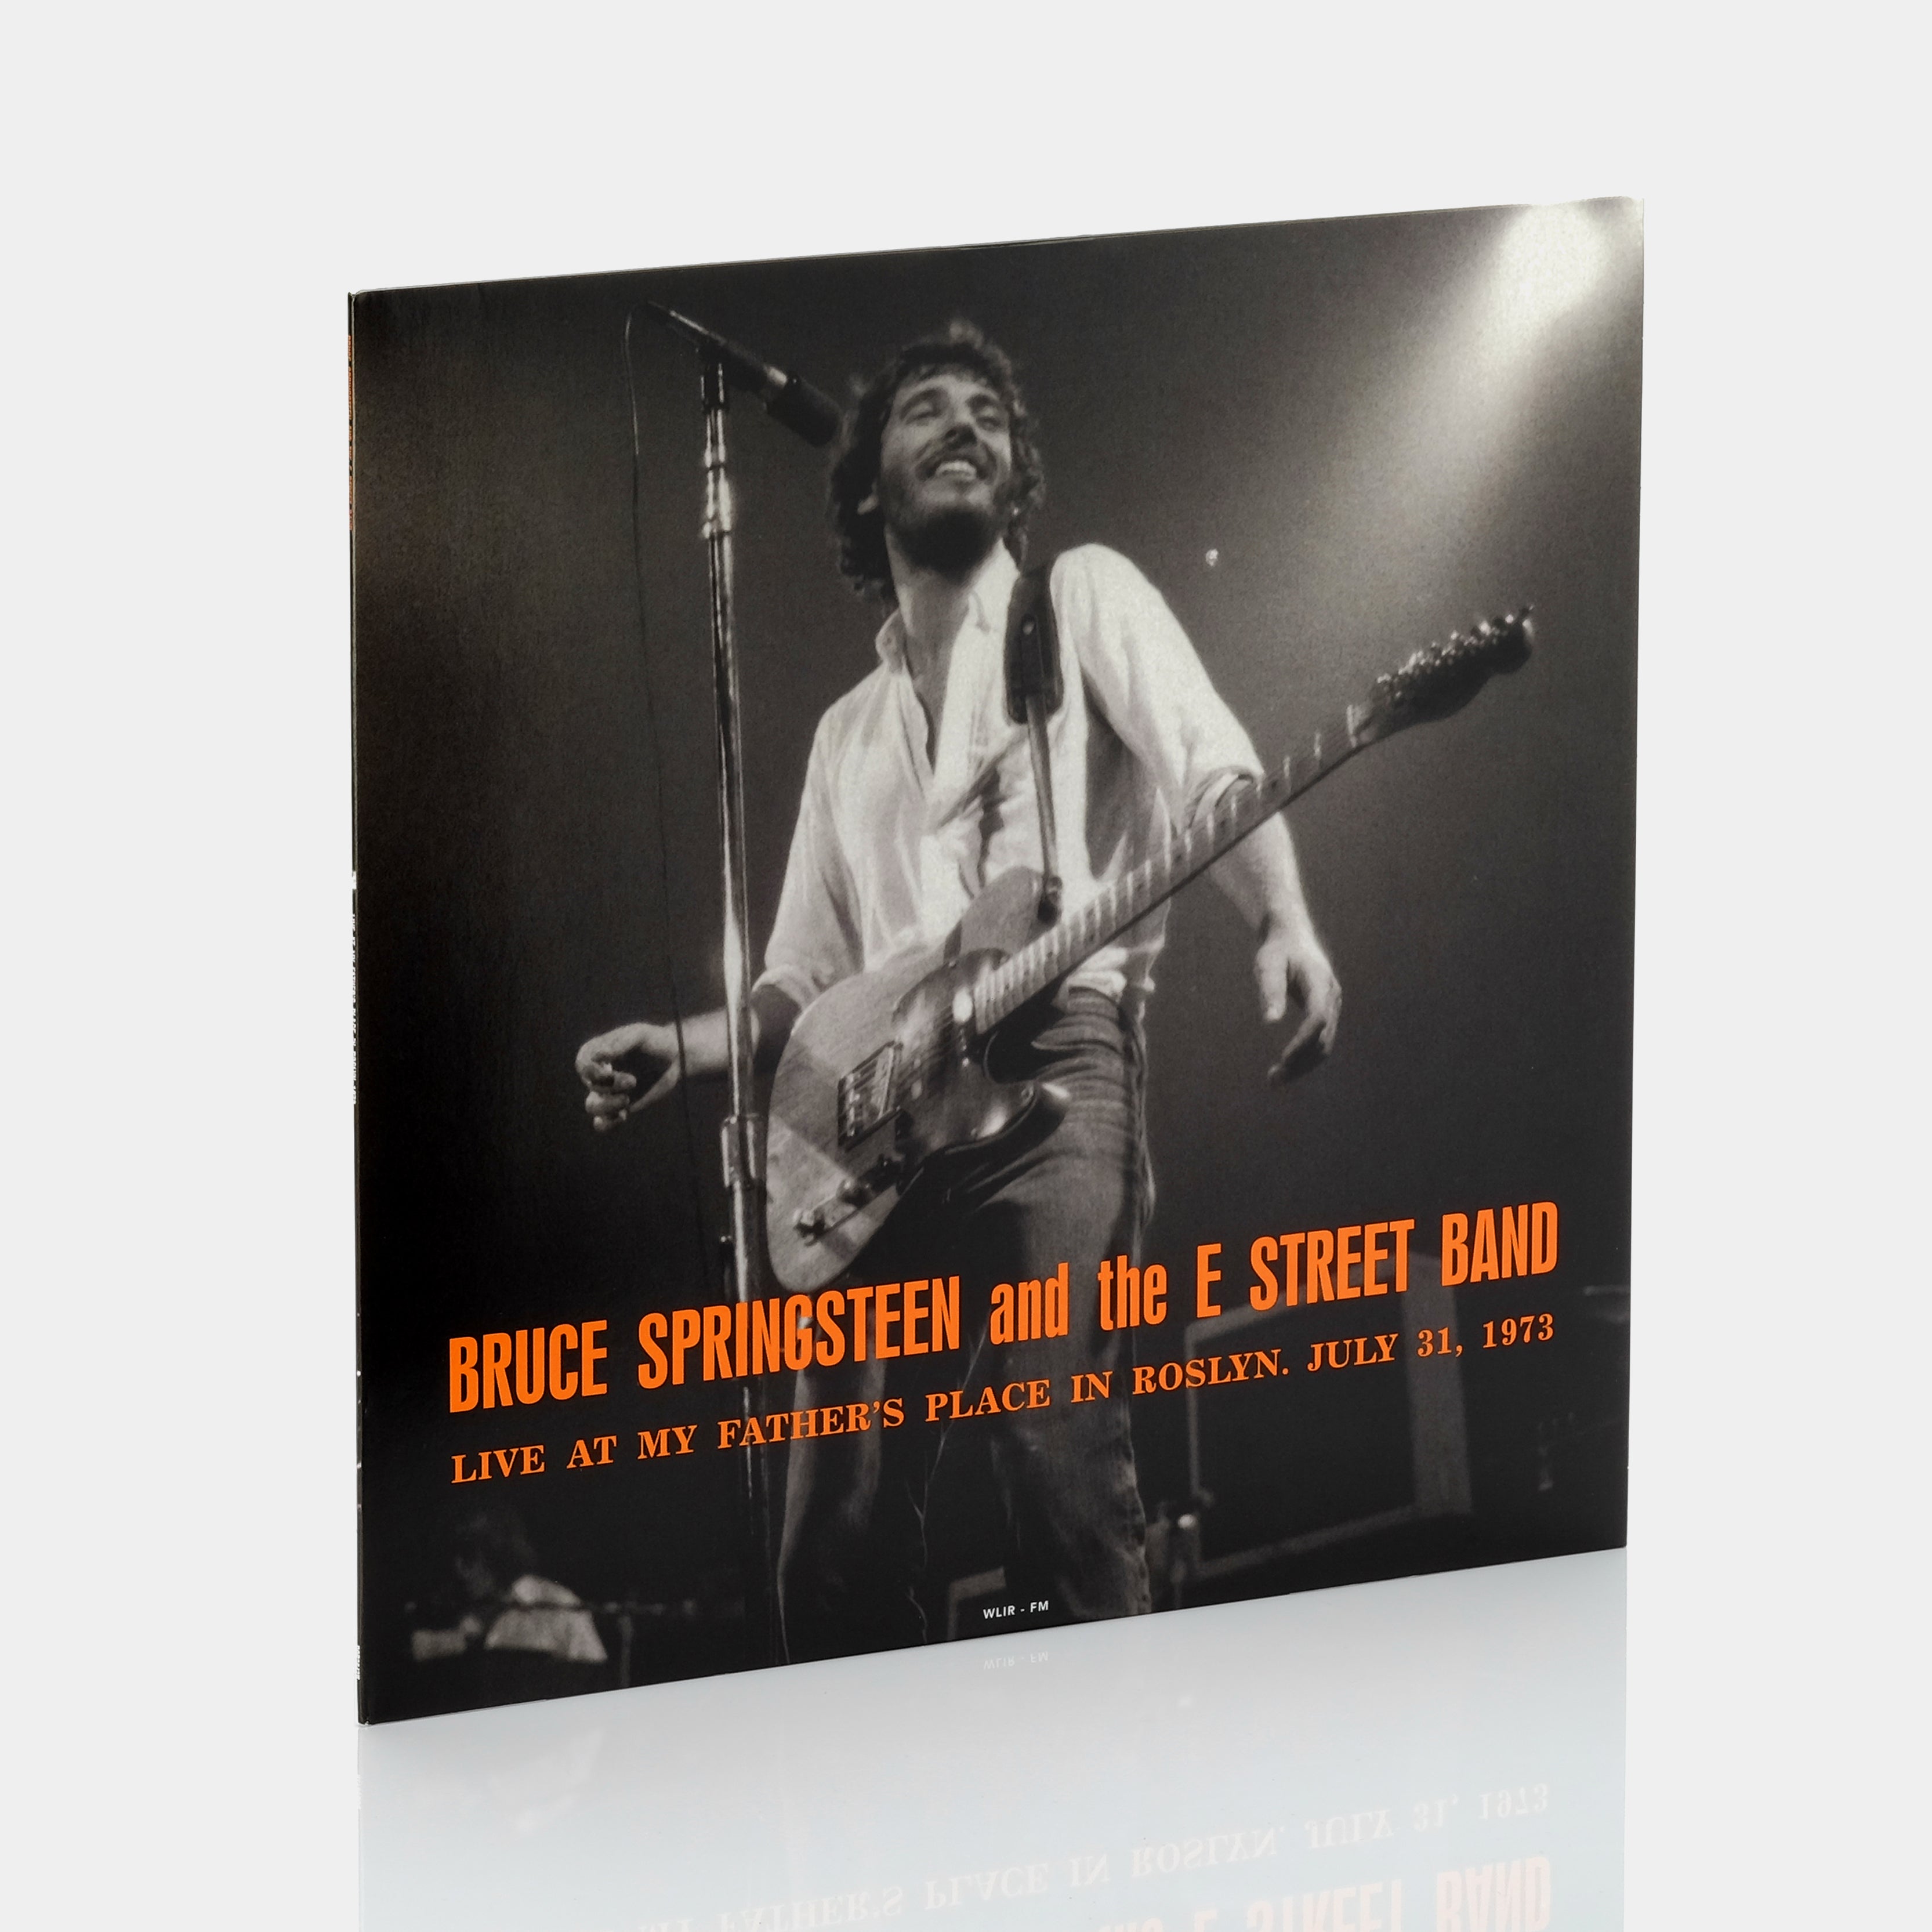 Bruce Springsteen and the E Street Band - Live at My Father's Place in Roslyn - July 31, 1973 LP Blue Vinyl Record